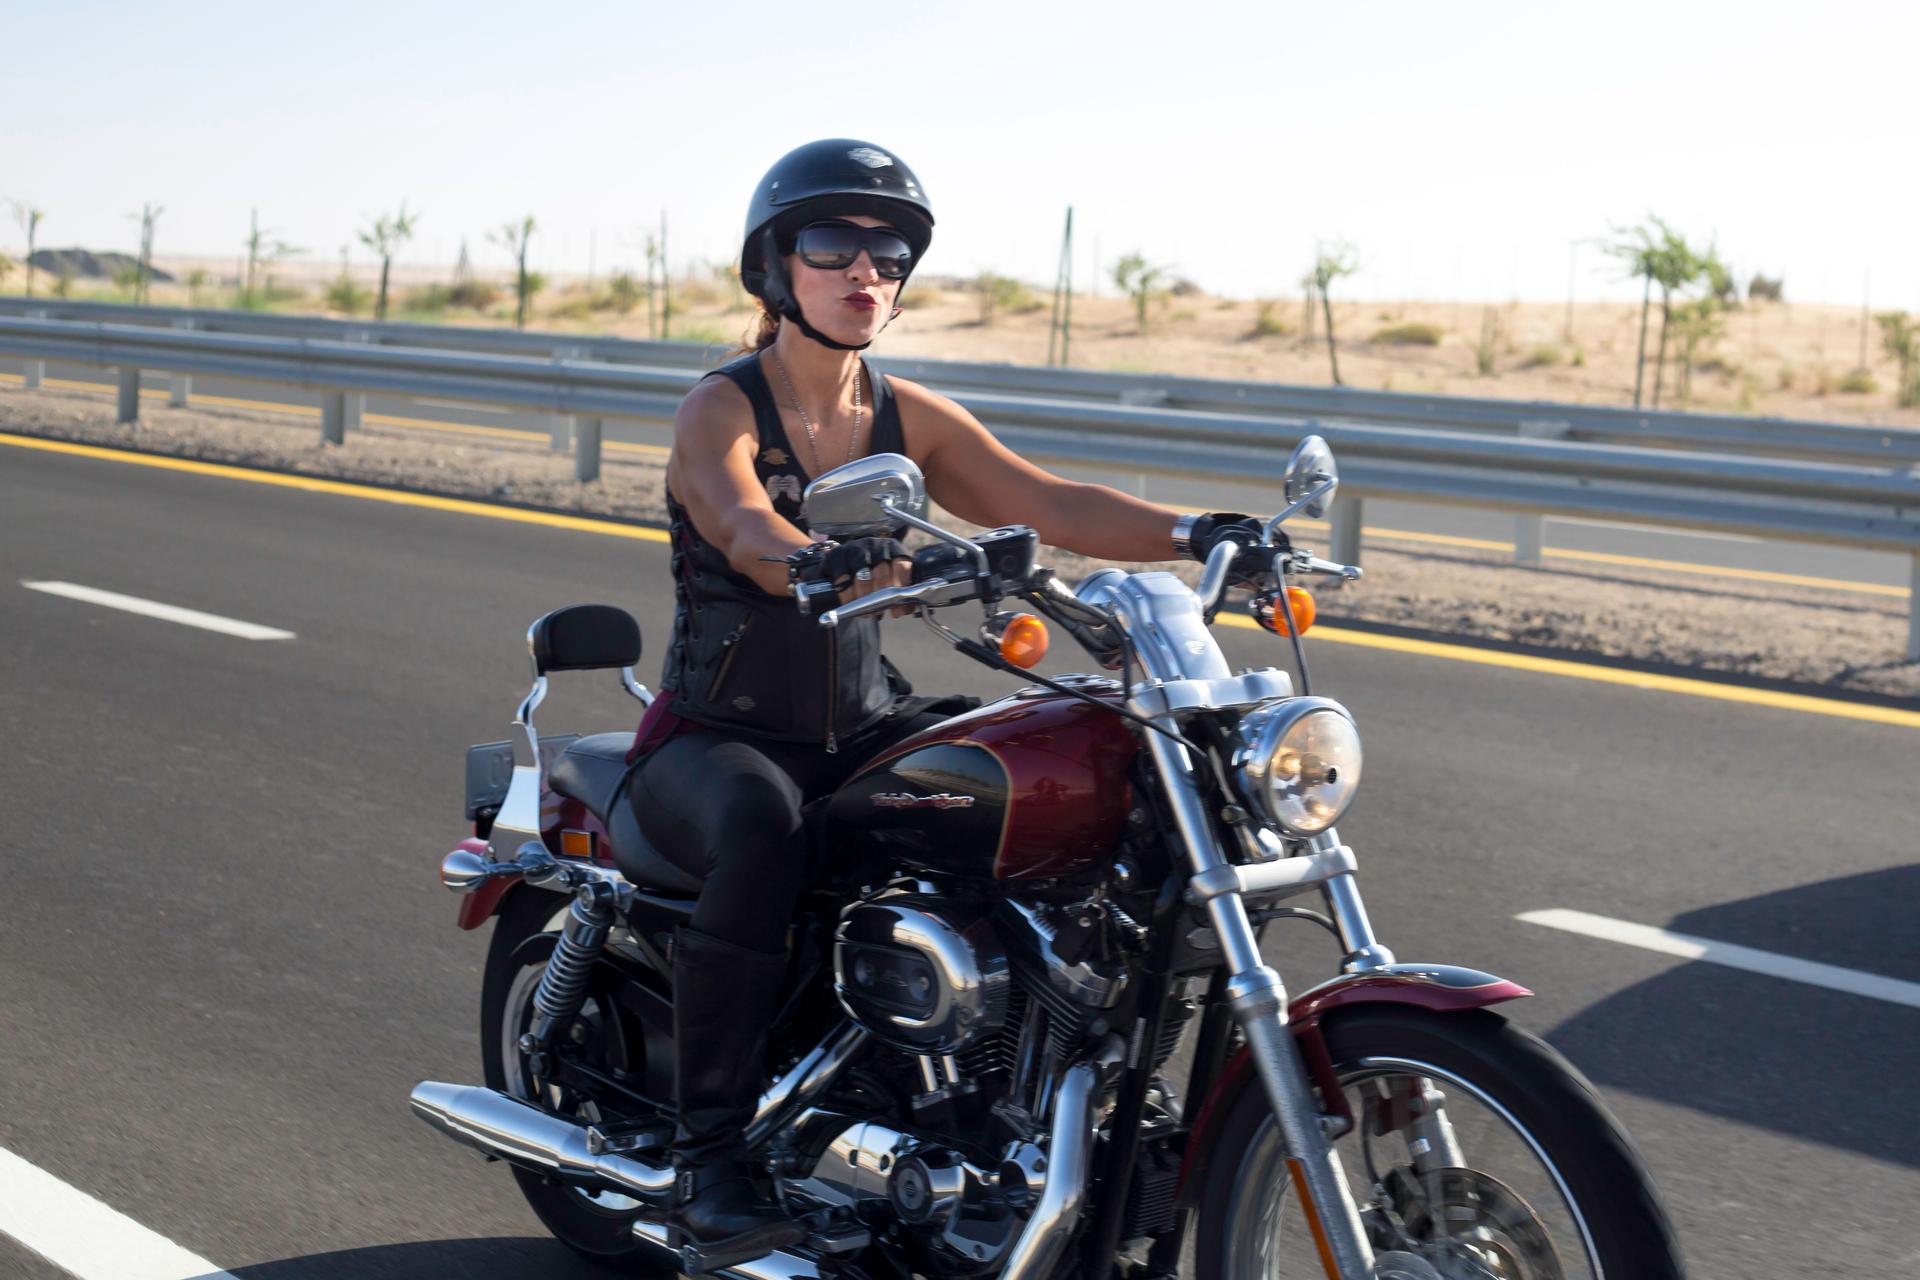 A Dubai Ladies of Harley rider on the road during International Female Ride Day.